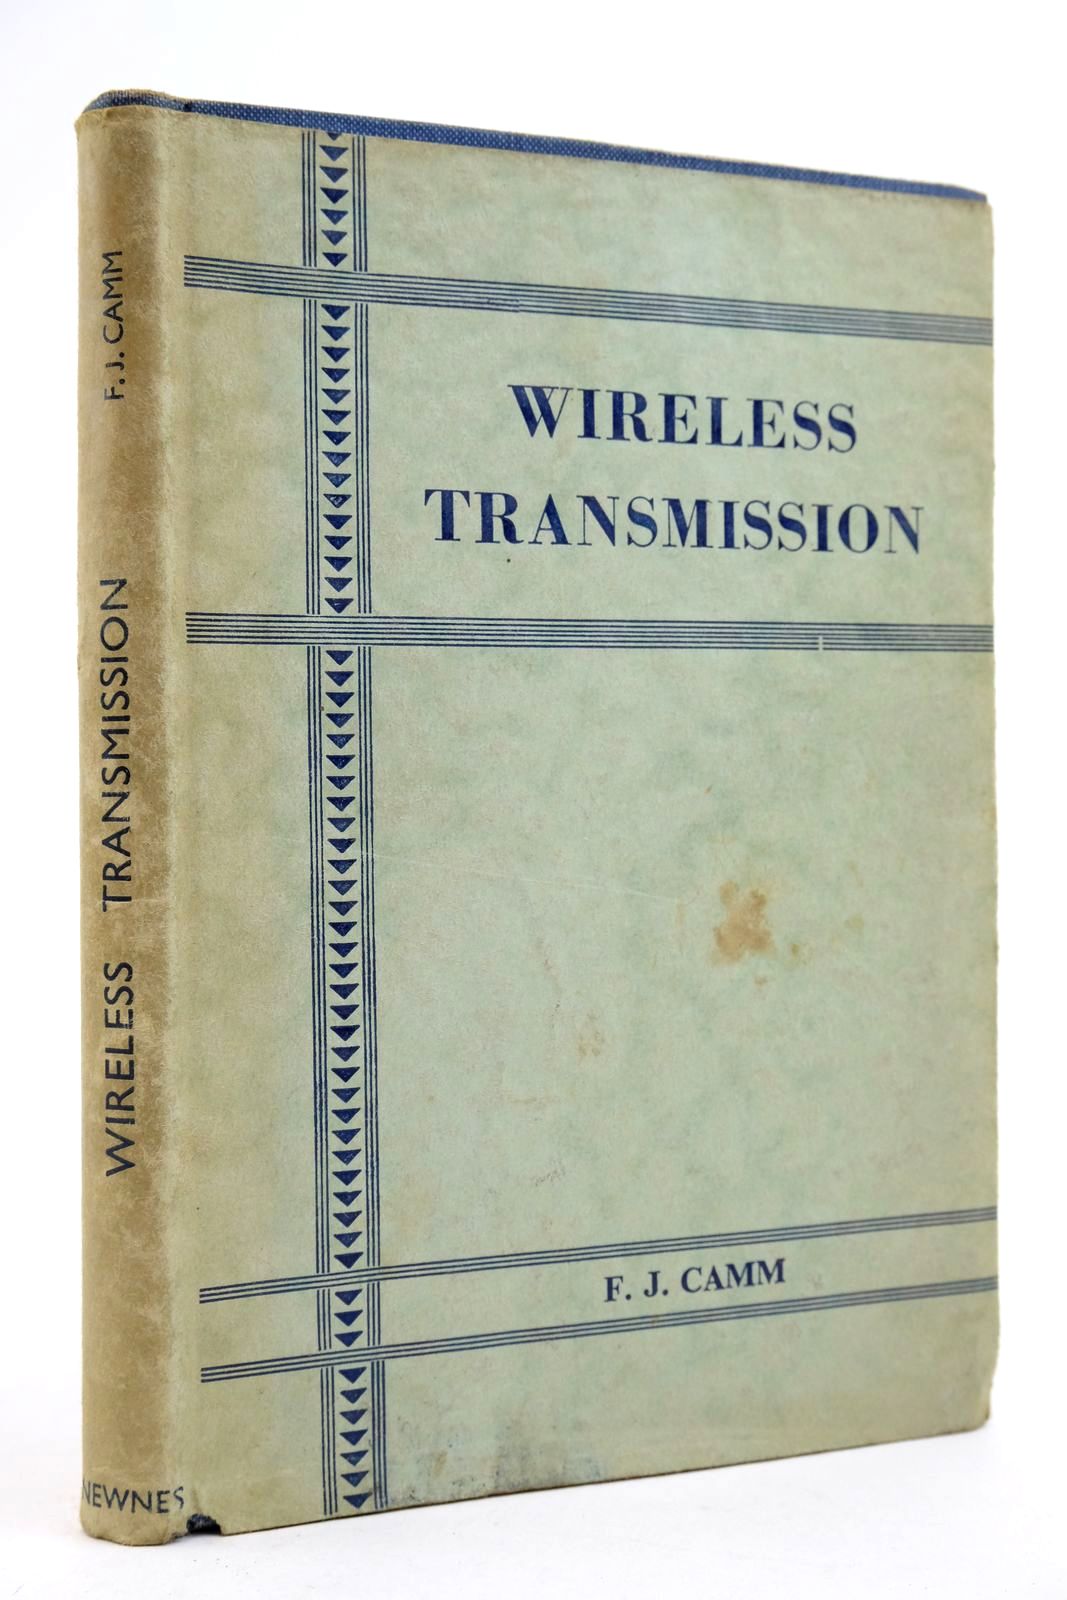 Photo of WIRELESS TRANSMISSION written by Camm, F.J. published by George Newnes Limited (STOCK CODE: 2139065)  for sale by Stella & Rose's Books